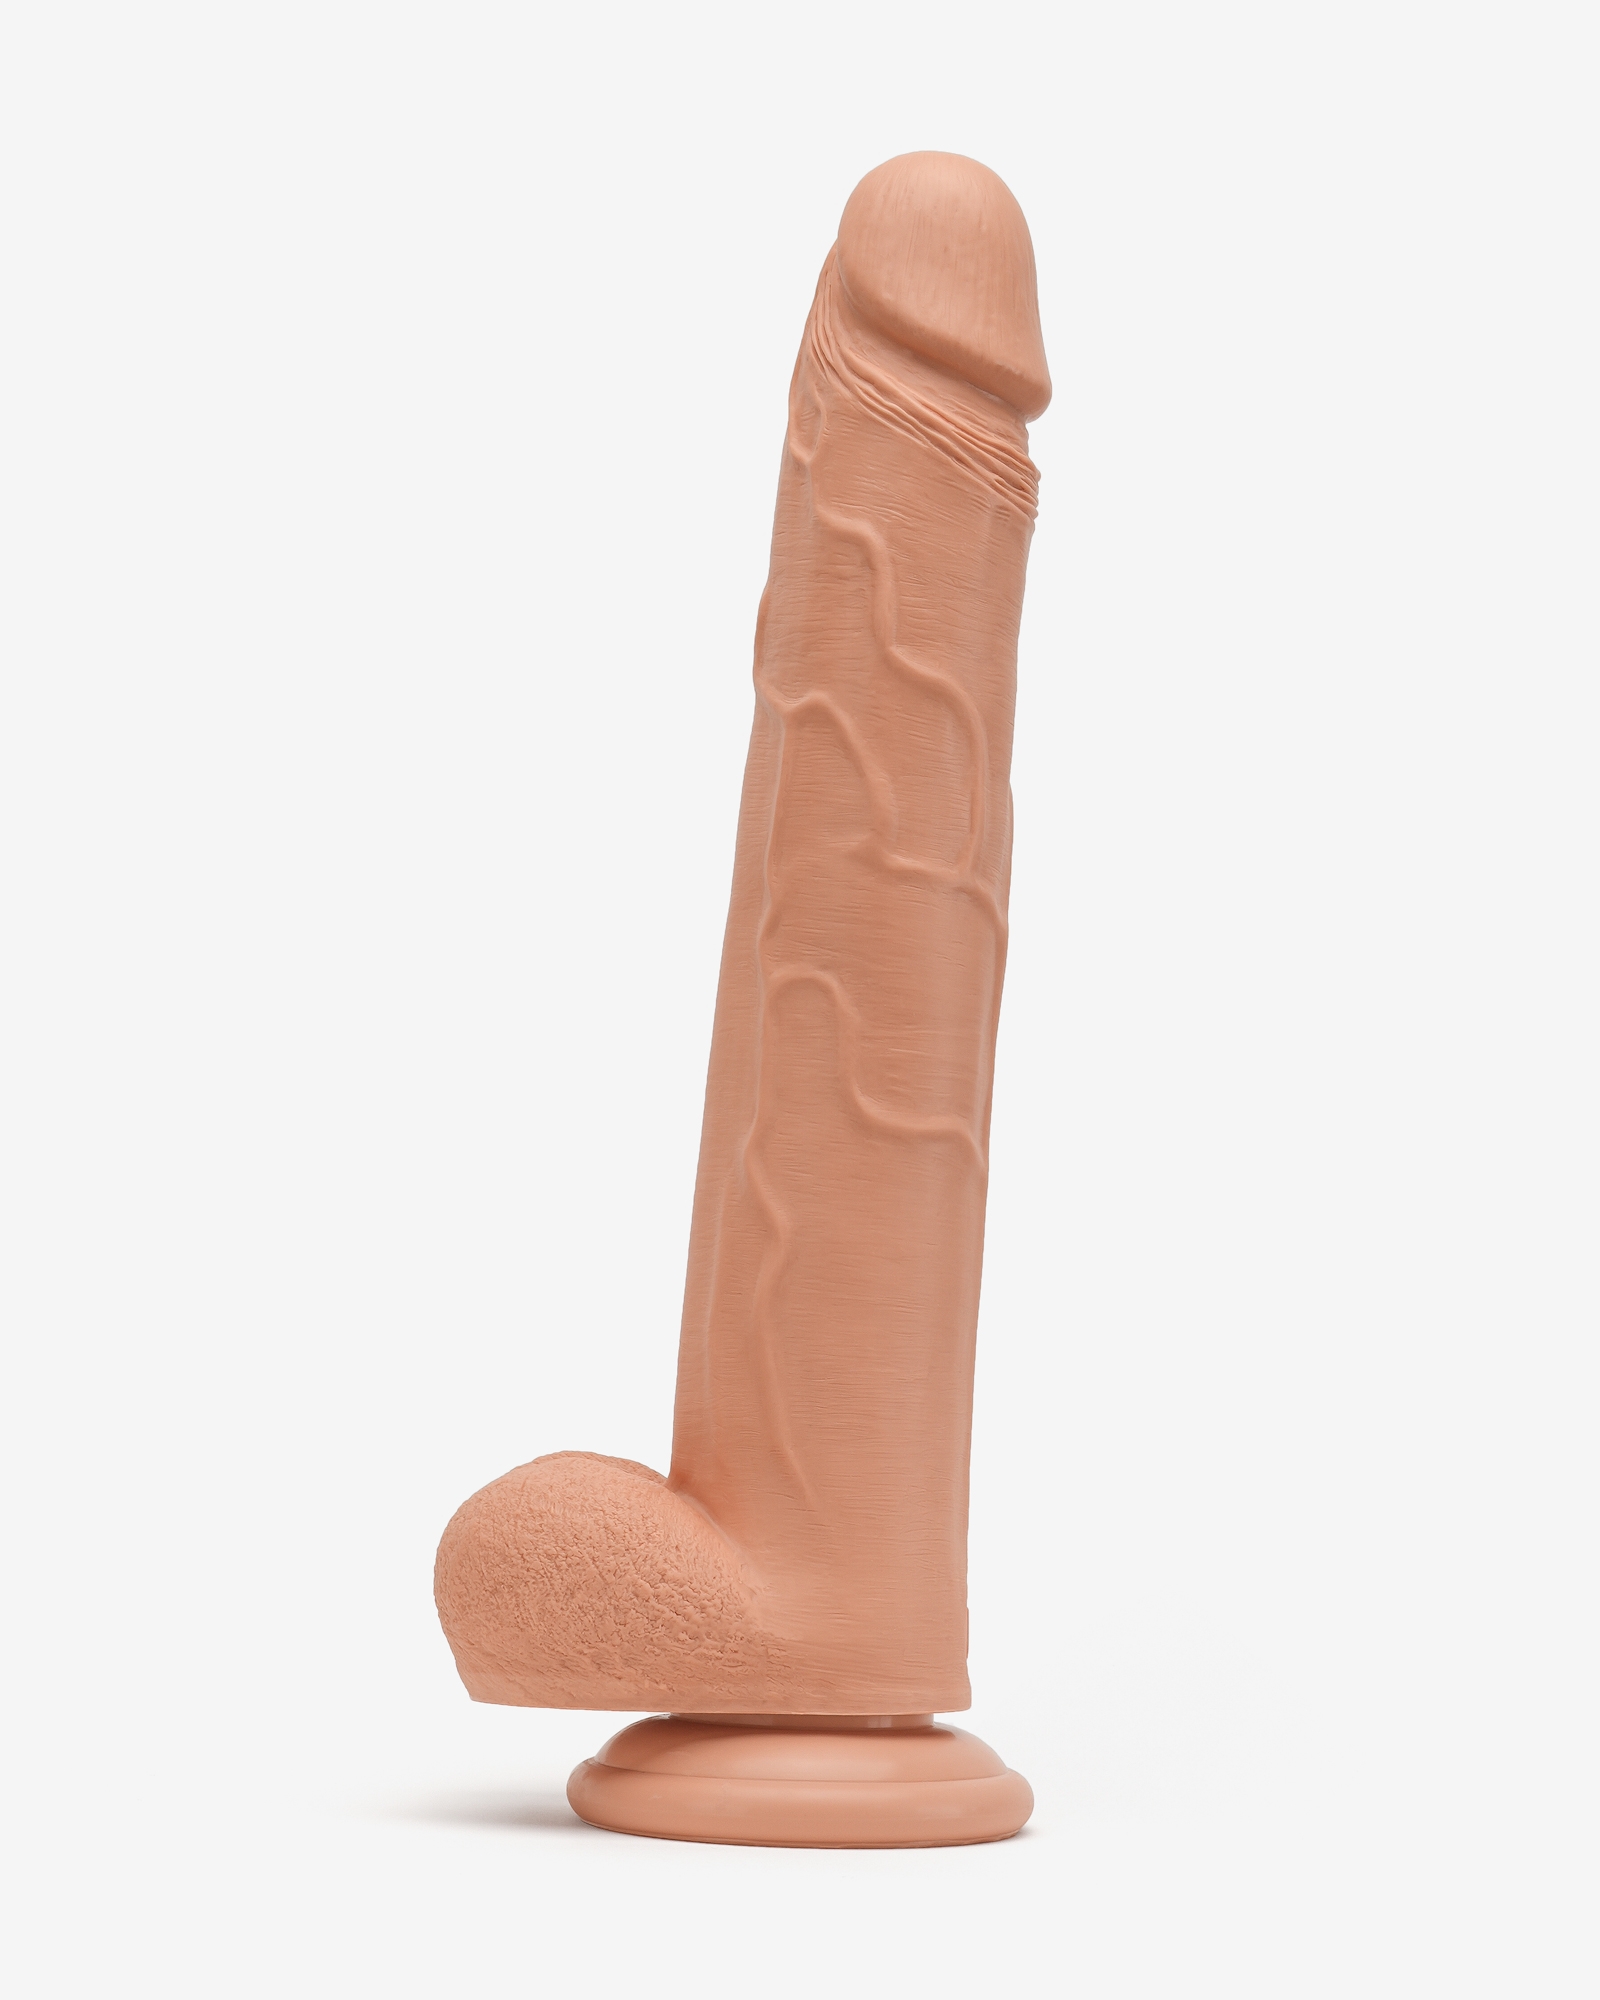 12 Inch Realistic Dildo with Suction Cup and Balls, Silicone Material, Dual Density, Tan - Left